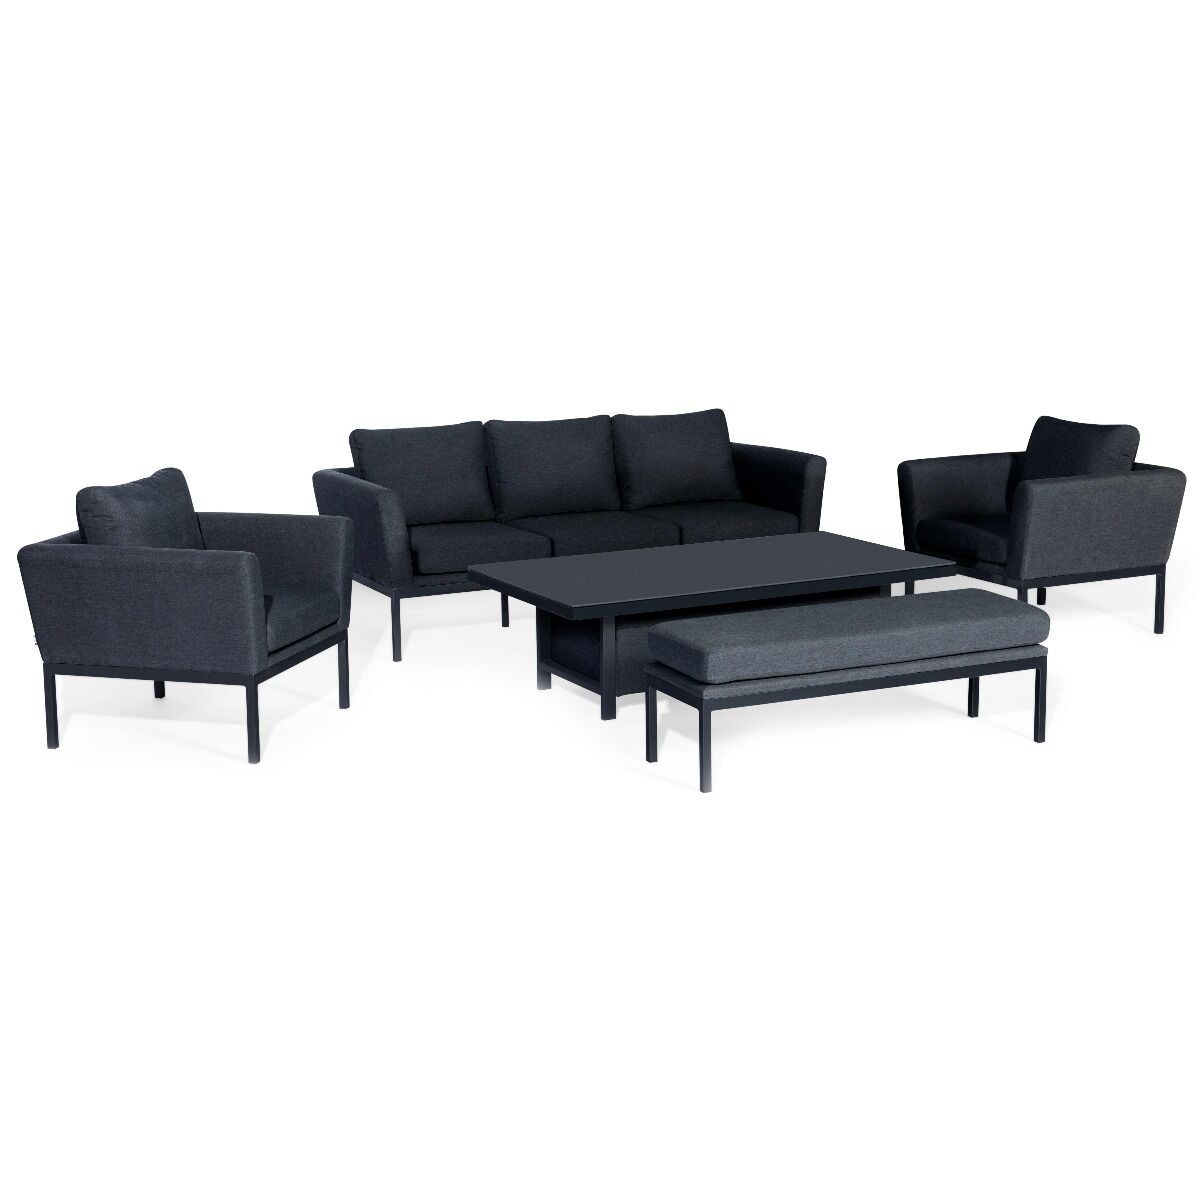 Maze - Outdoor Fabric Pulse 3 Seat Sofa Set with Rising Table - Charcoal product image